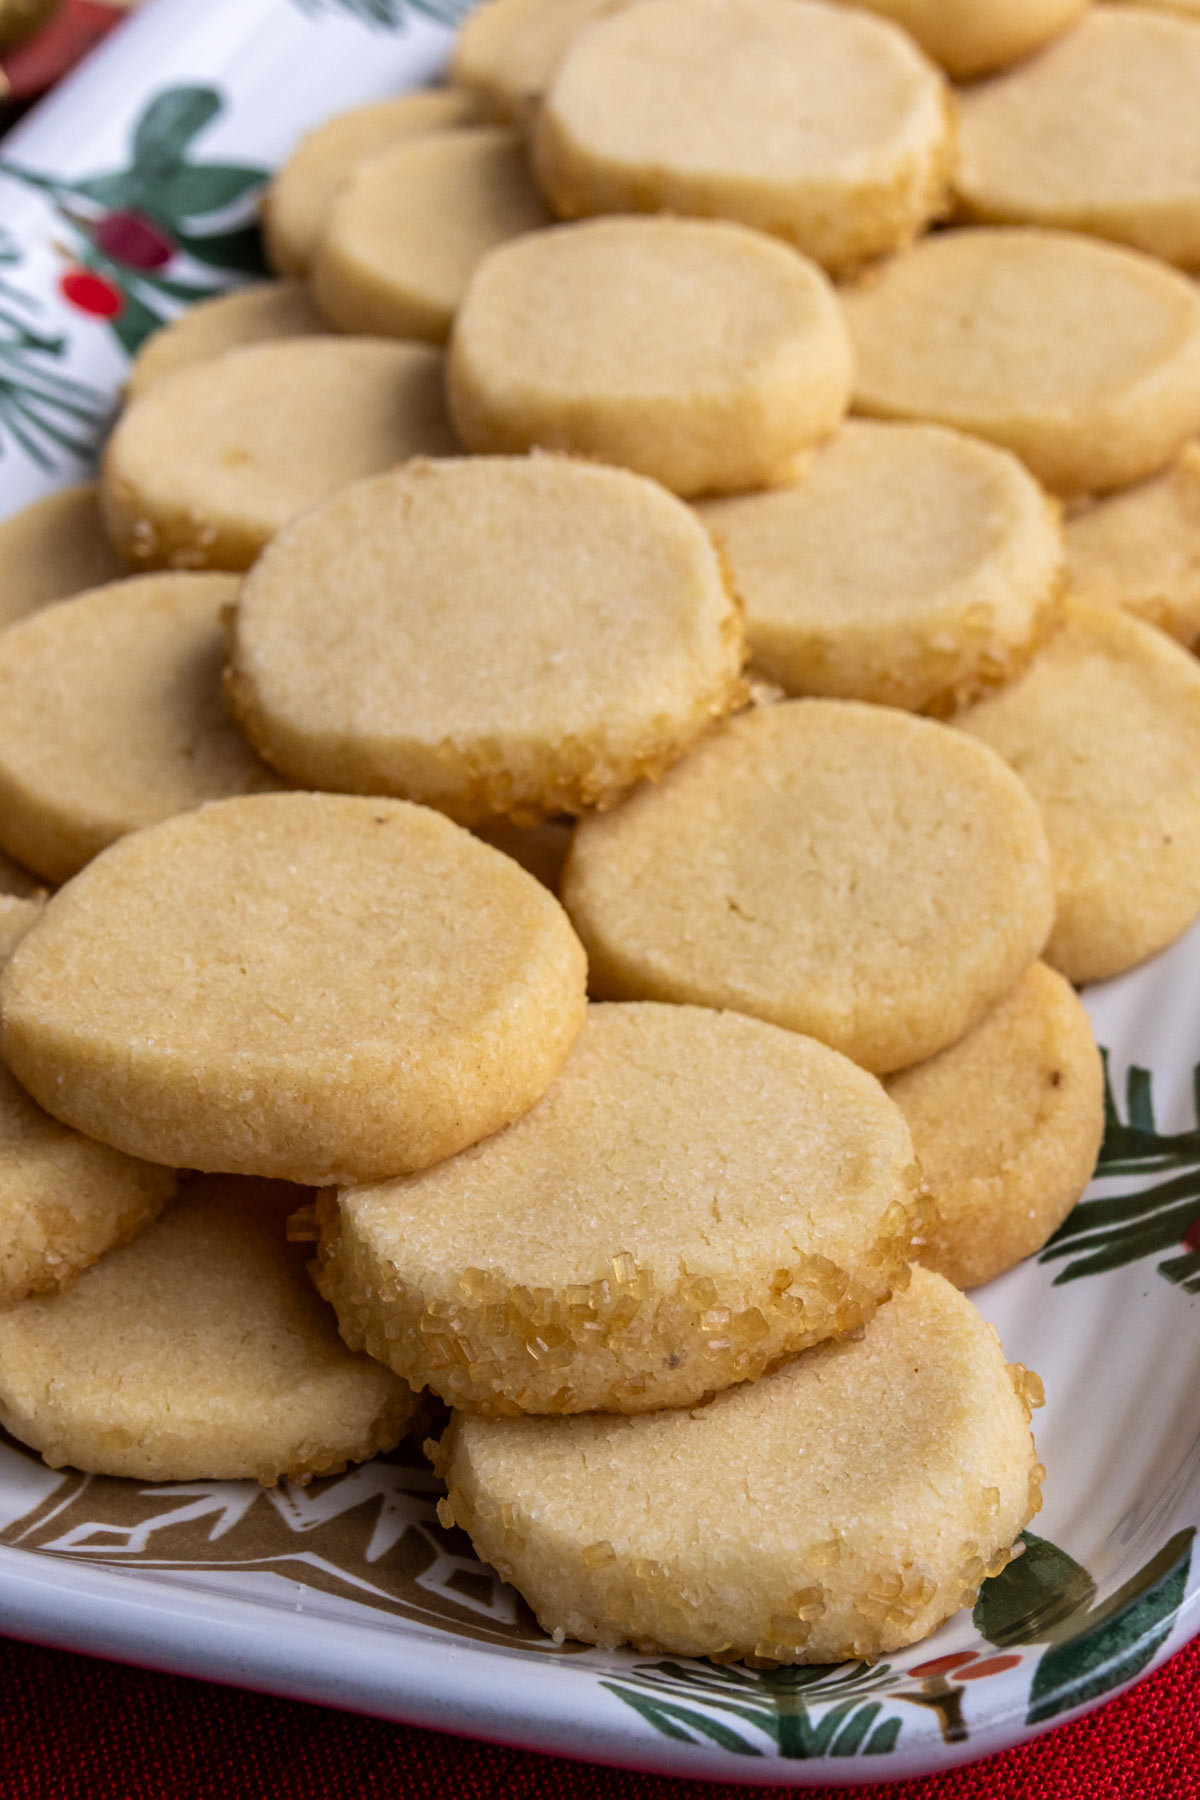 Heidesand cookies, some with raw sugar on the edges and some without, on a platter.